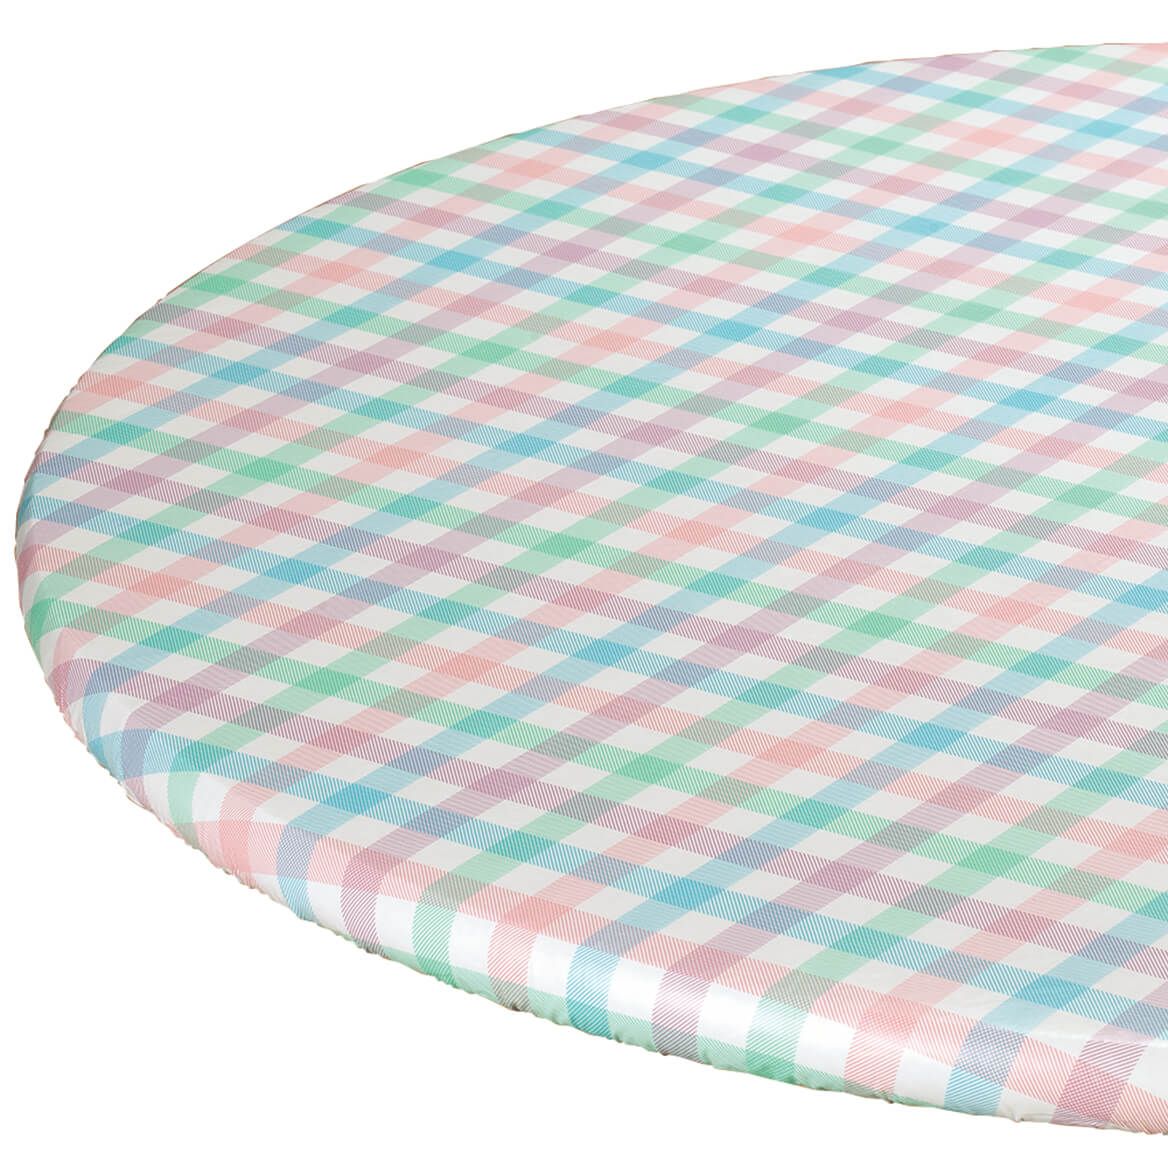 Spring Breeze Checked Vinyl Elasticized Table Cover + '-' + 369145